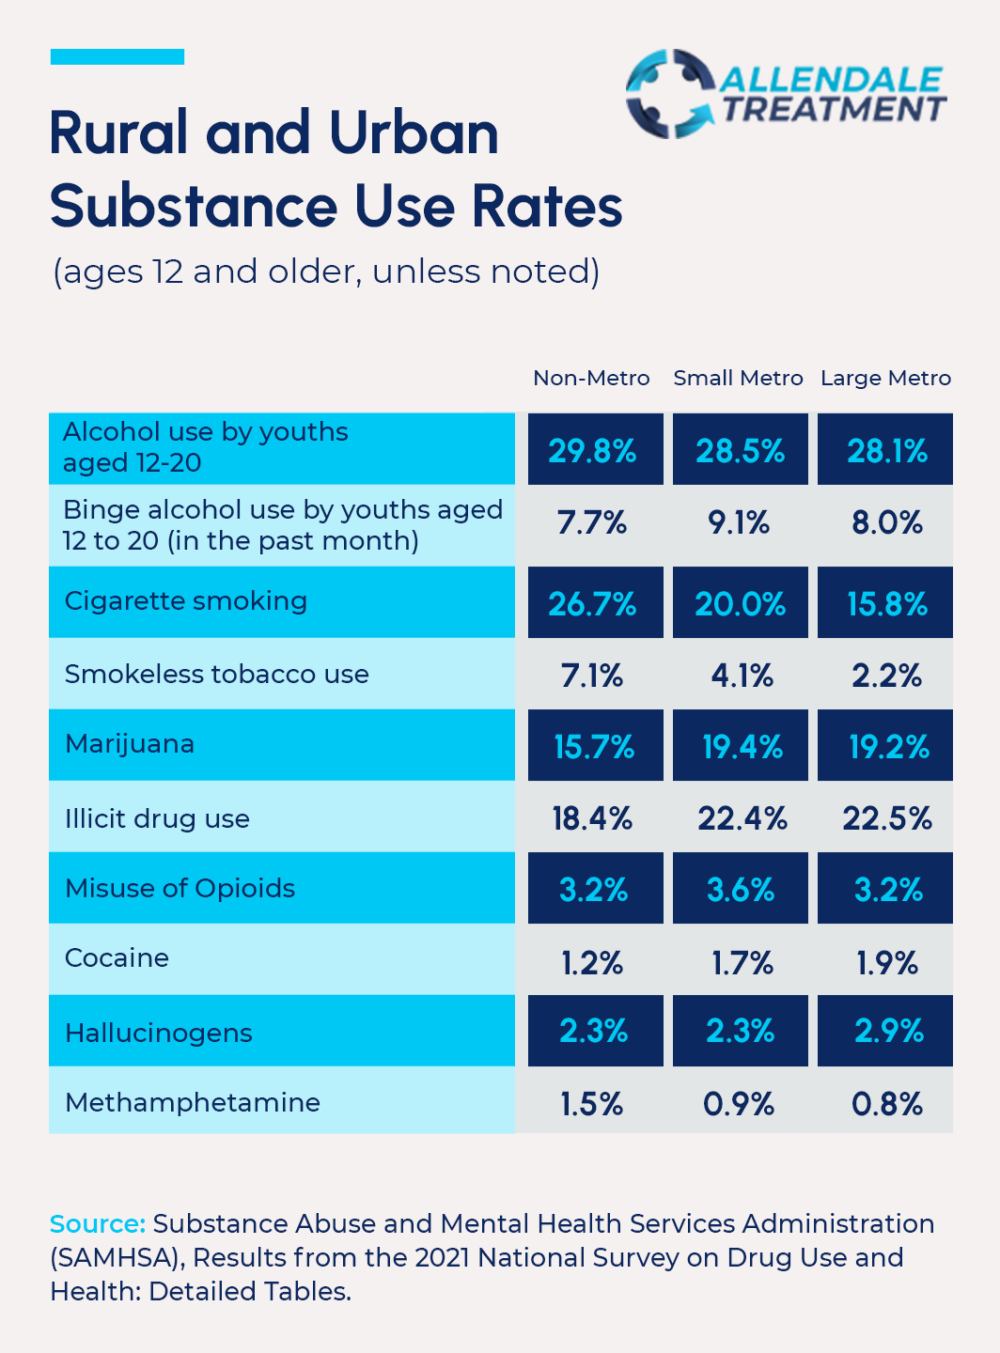 Rural Substance Use Rates Infographic Allendale Treatment